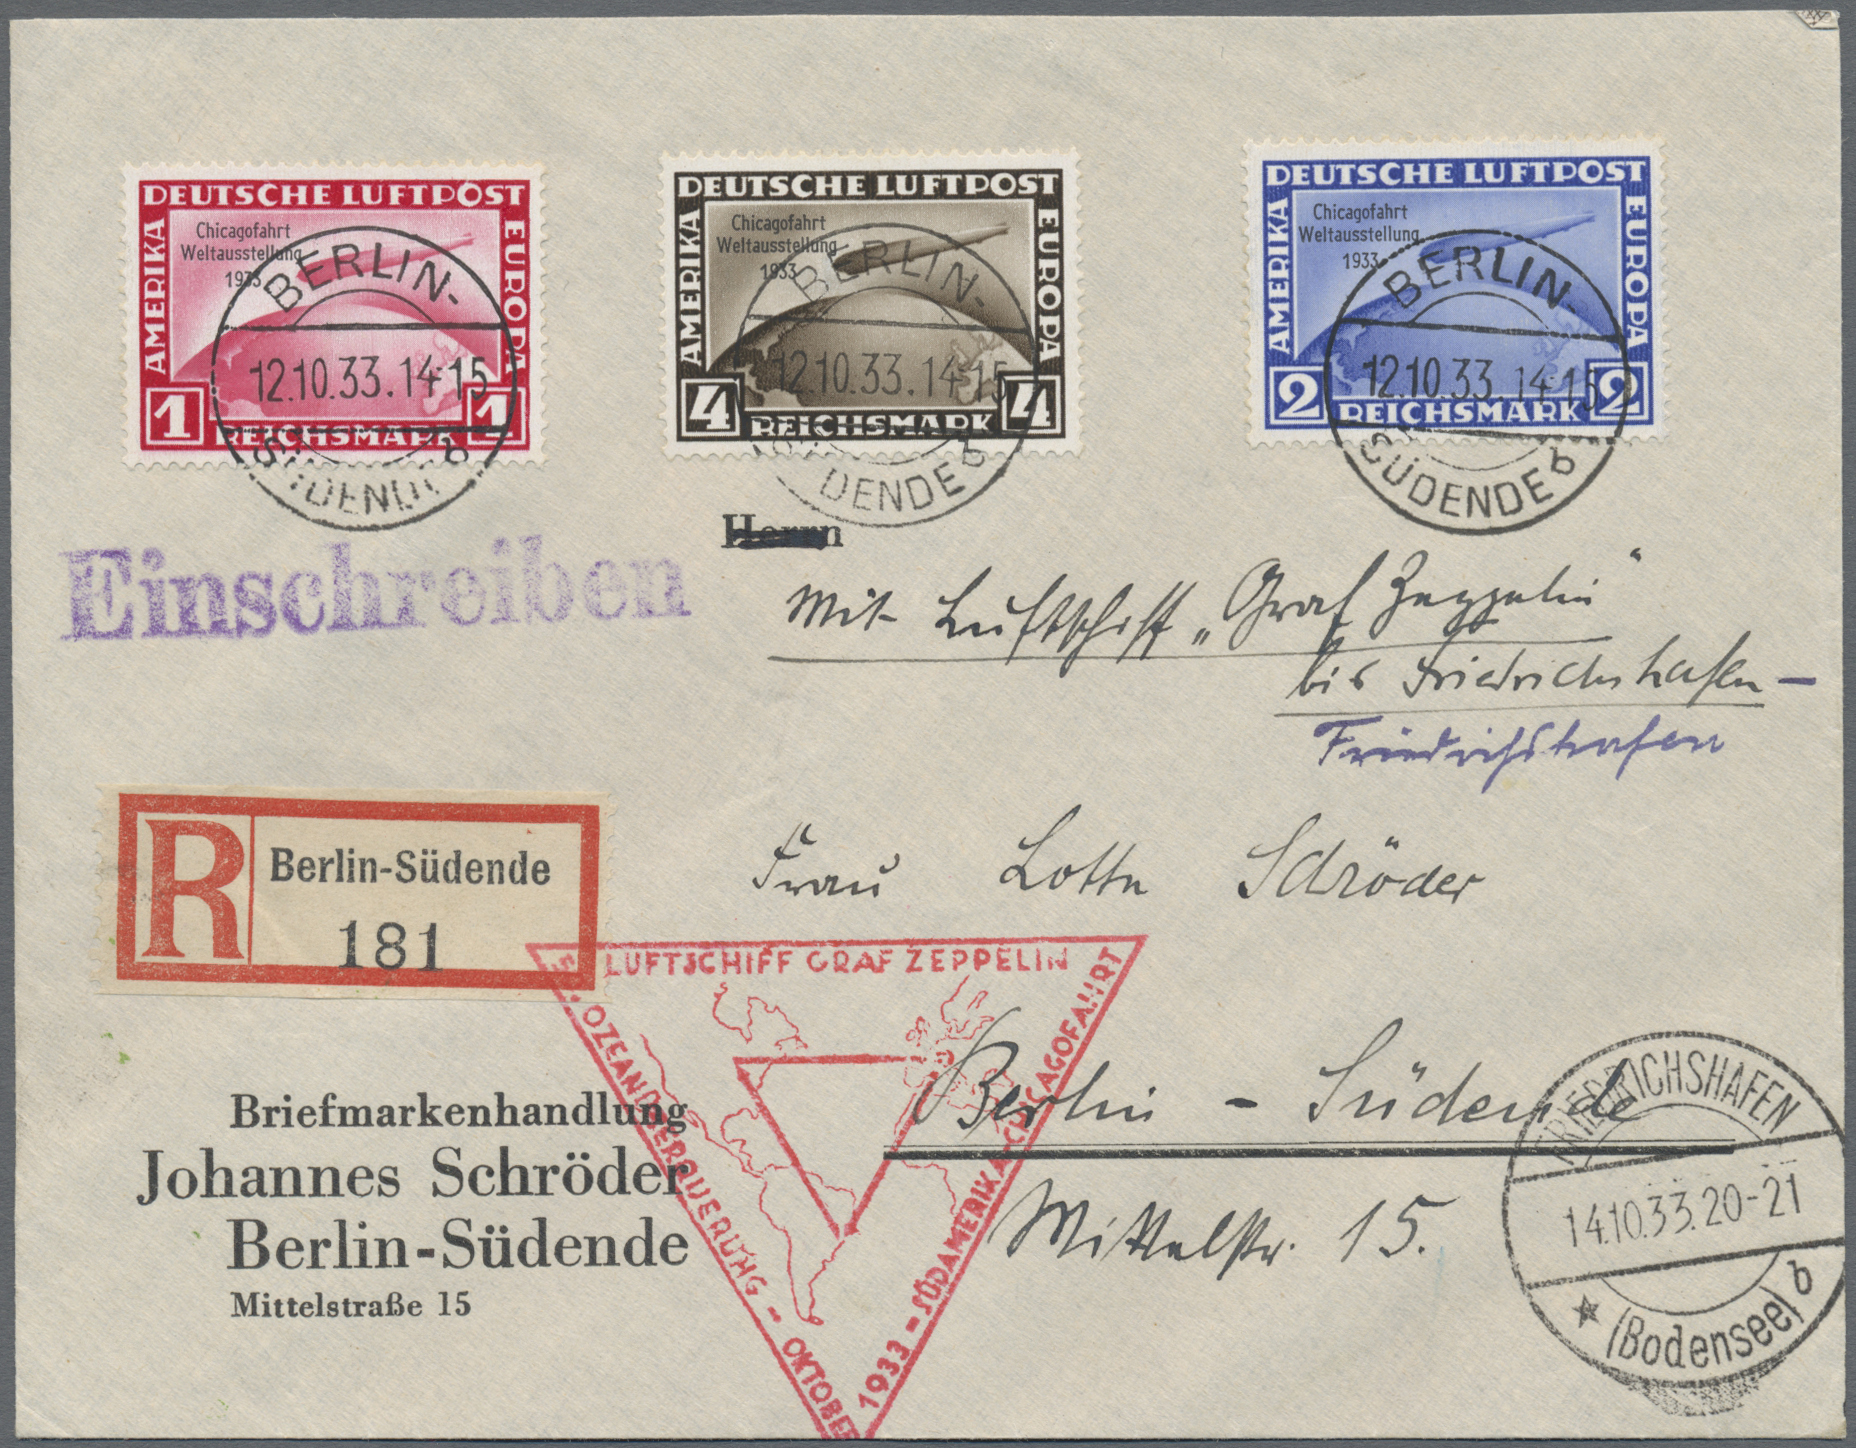 Lot 36431 - Deutsches Reich  -  Auktionshaus Christoph Gärtner GmbH & Co. KG Sale #44 Collections Germany